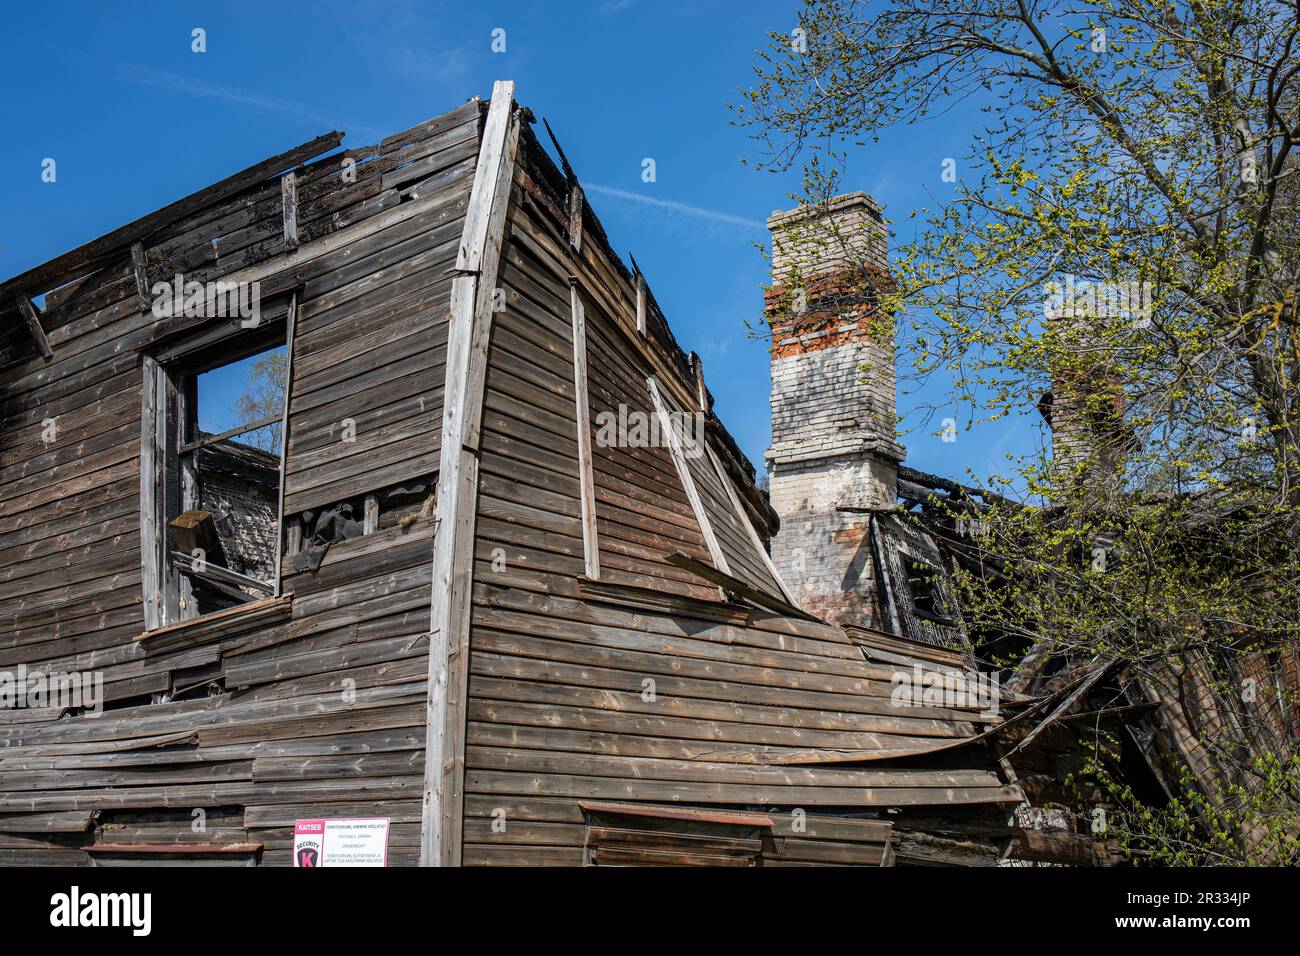 Partly burnt and collapsed wooden house in Kopli district of Tallinn, Estonia Stock Photo